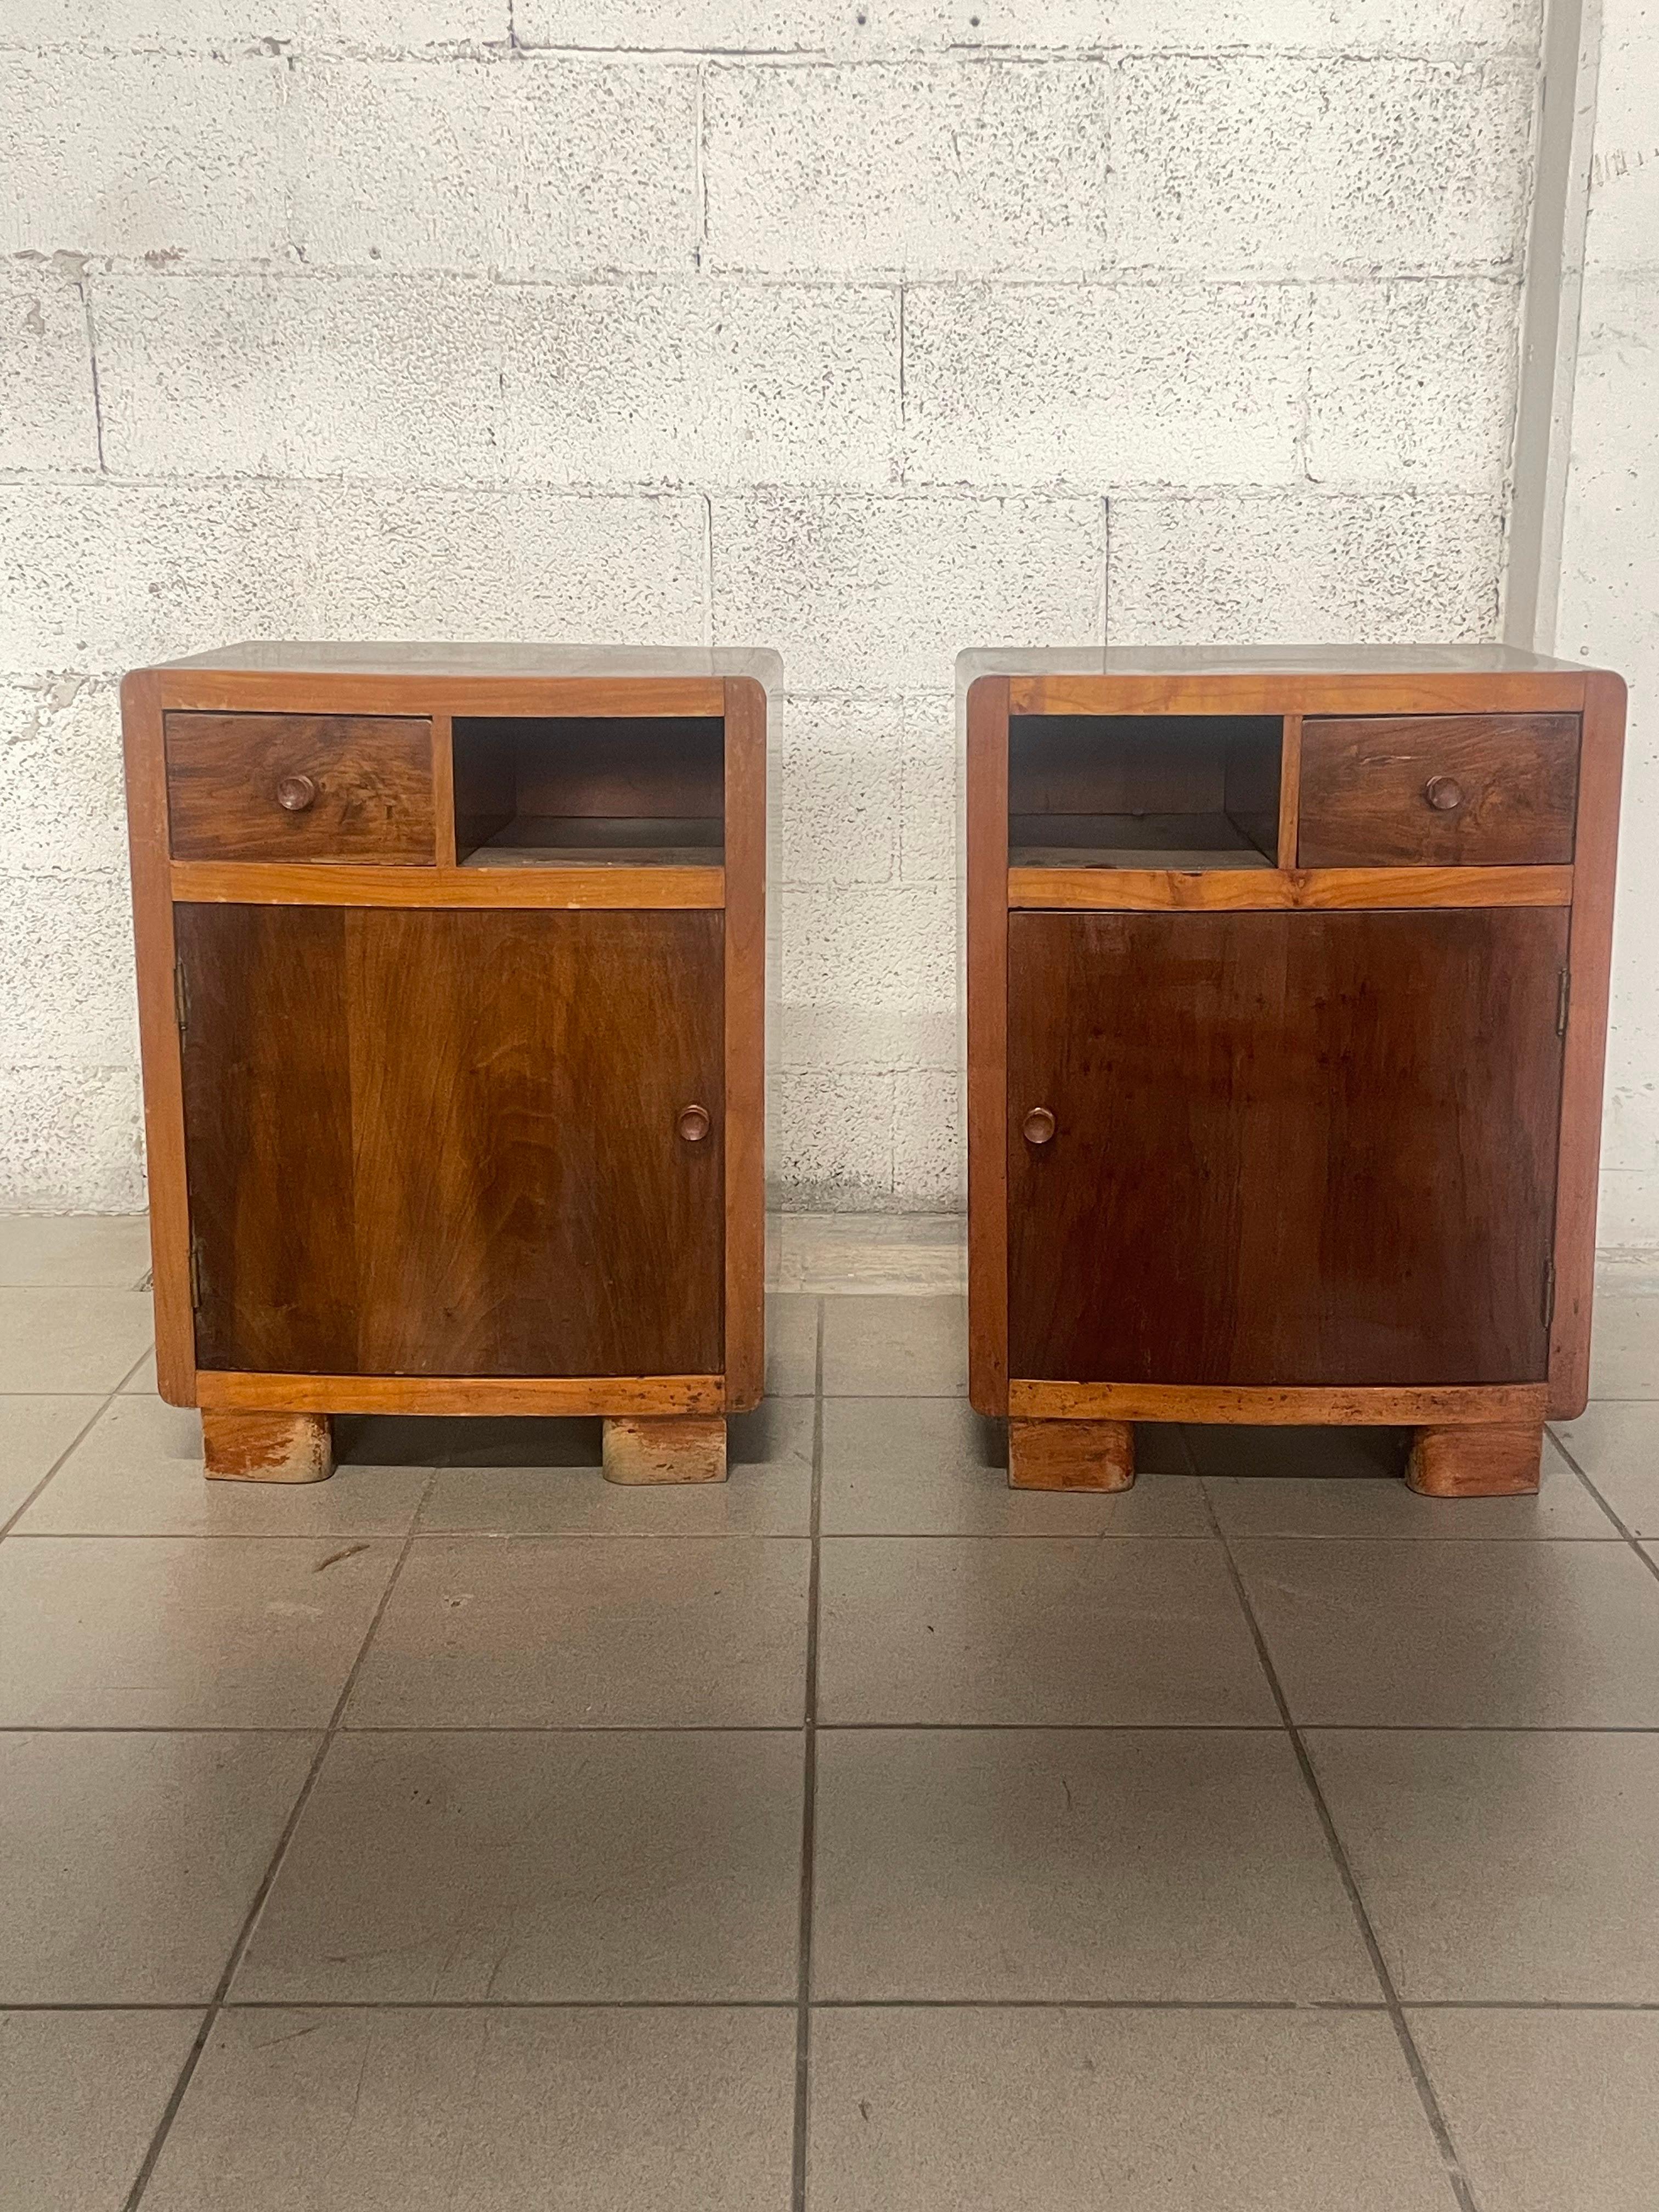 Pair of deco bedside tables, made in Italy in the 1940s.

Walnut wood frame with a door, a small drawer and an open compartment.

Recently restored they are in perfect condition.